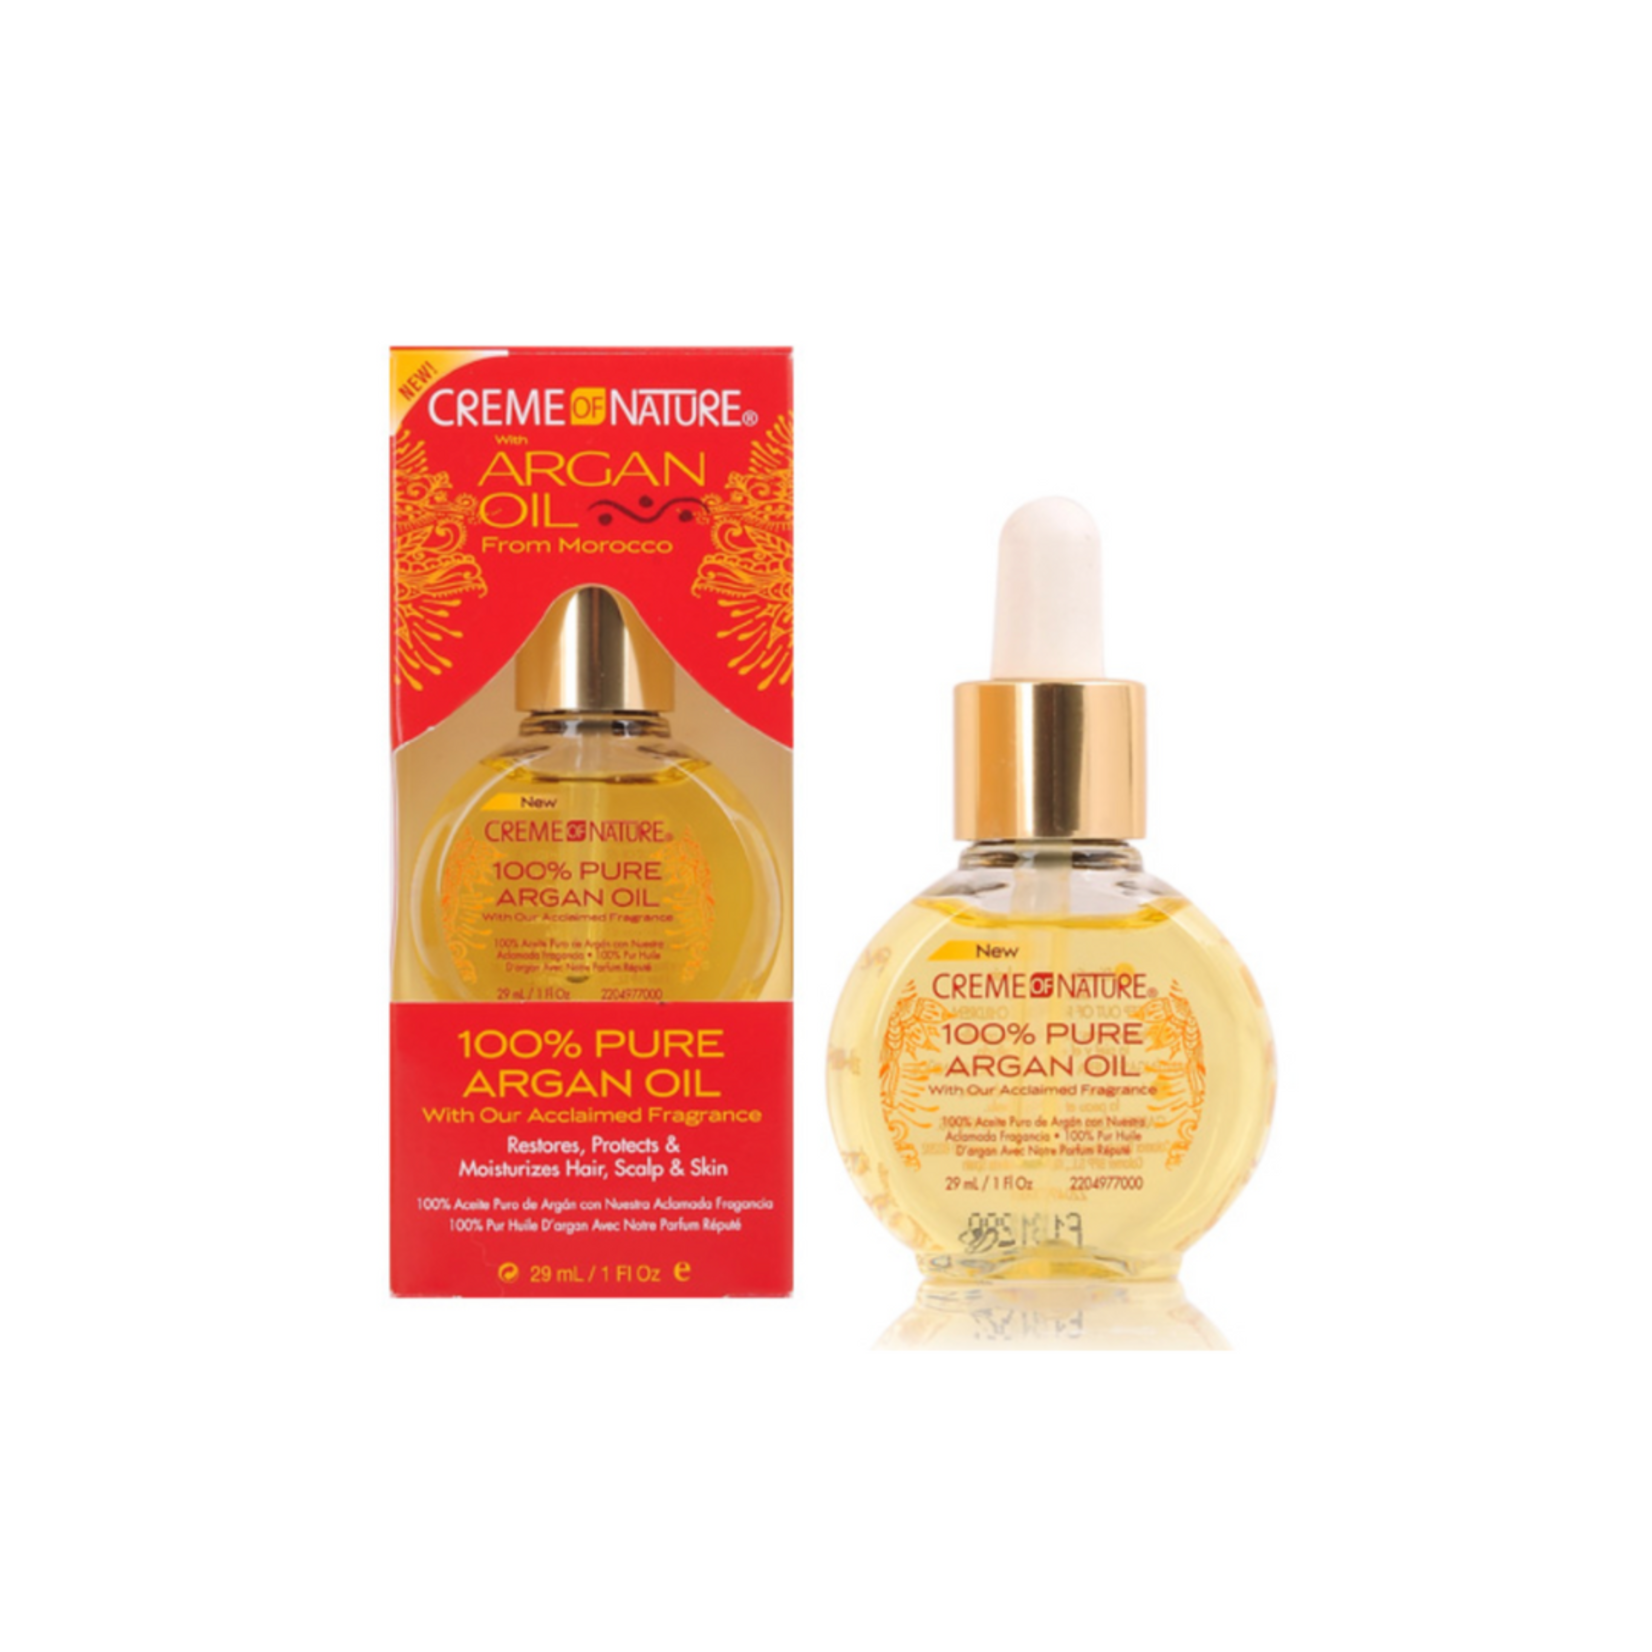 Creme of Nature Creme of Nature 100% Argan Oil from Morocco 1oz